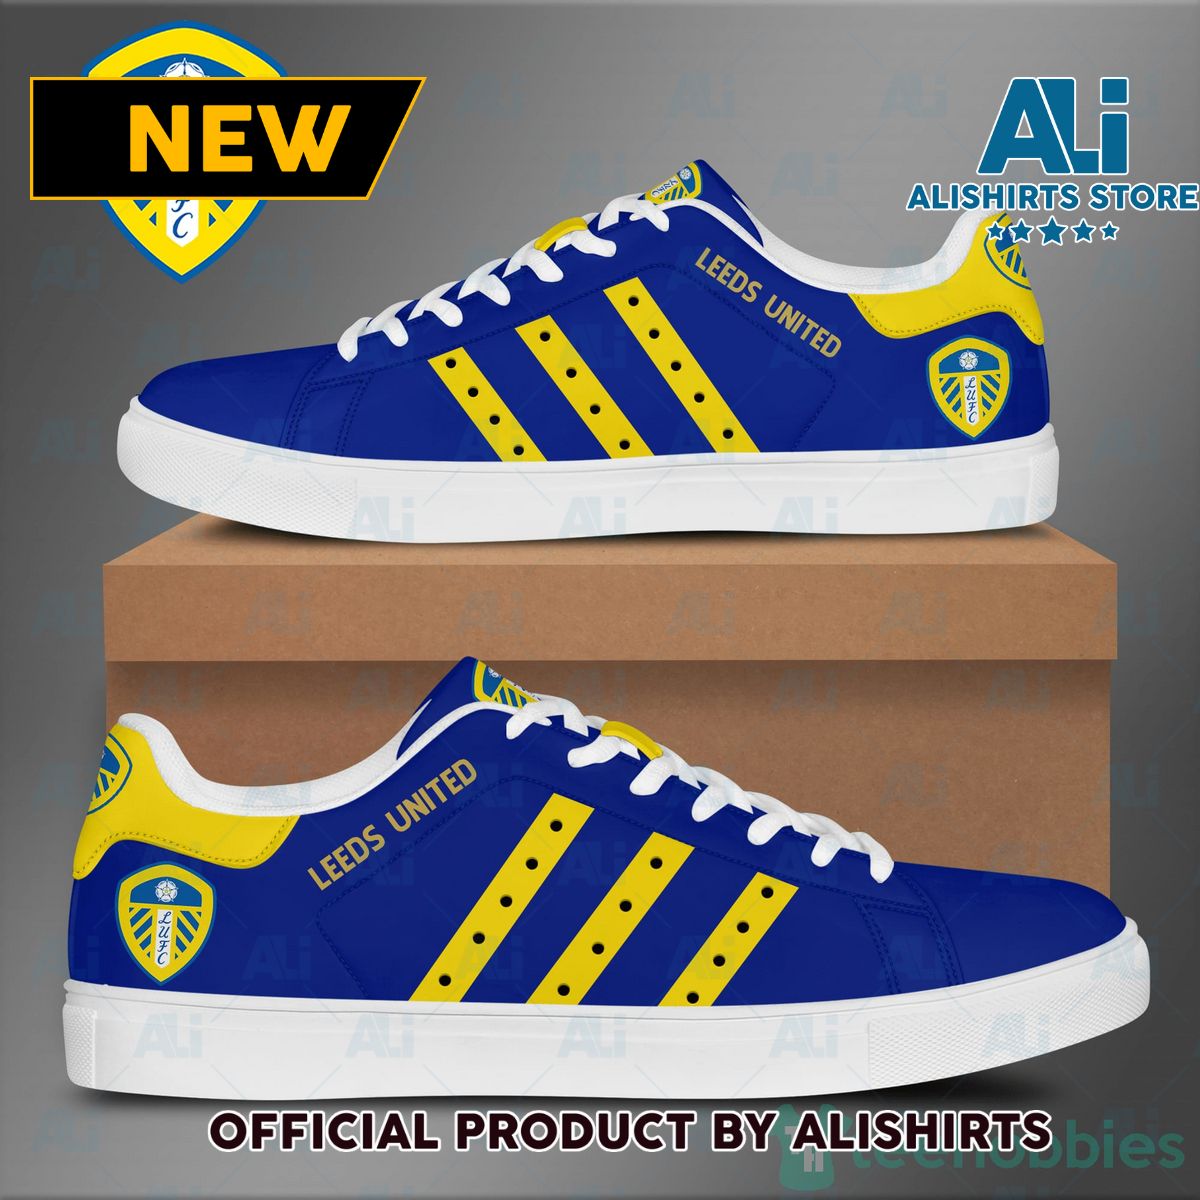 Leeds United Adidas Stan Smith Low Top Skate Shoes